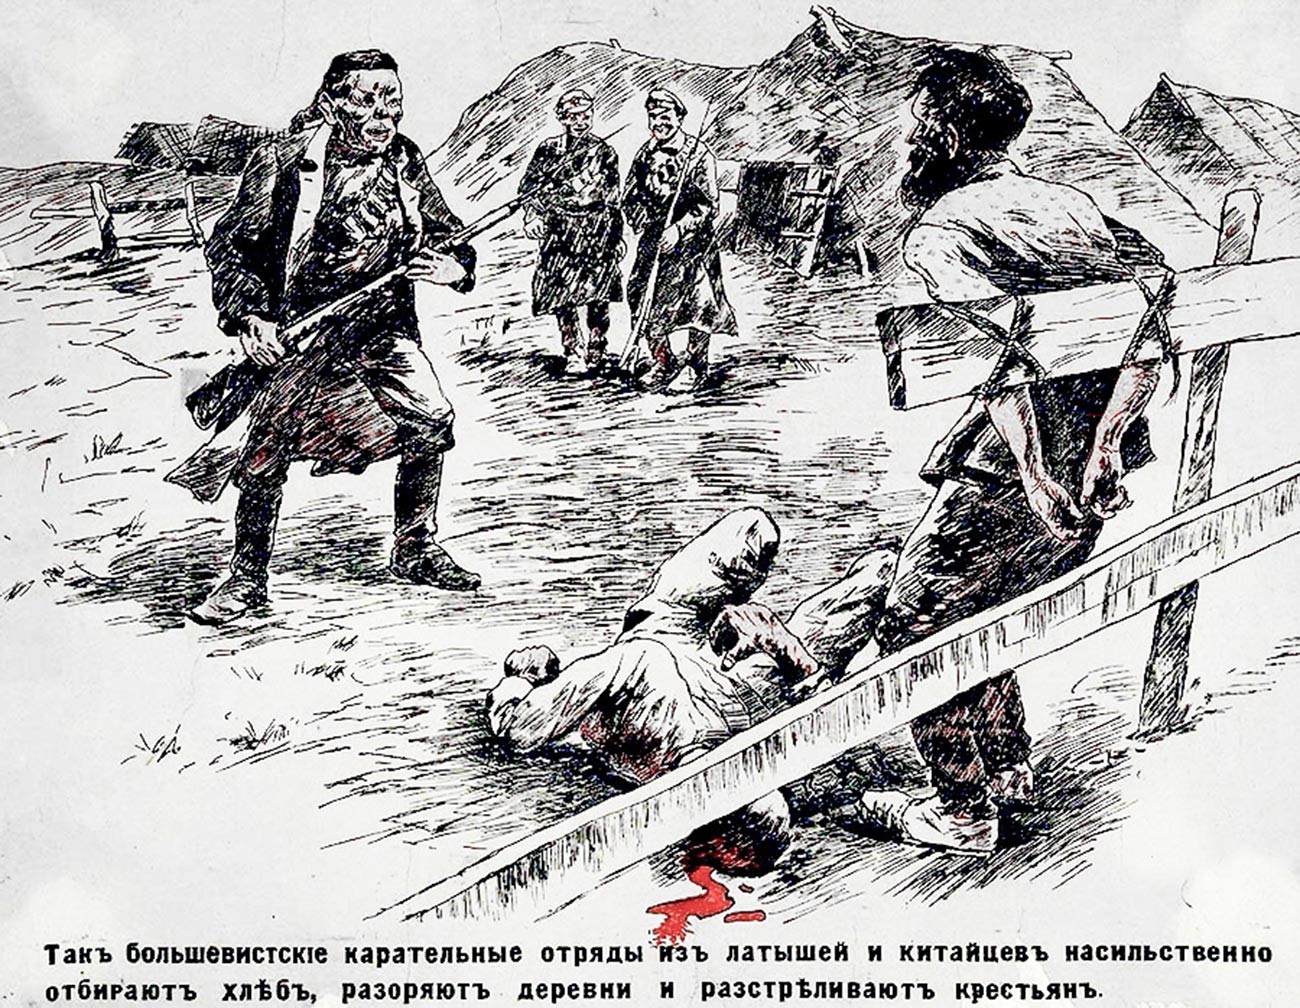 White movement propaganda poster depicting Red Chinese and Latvian soldiers.